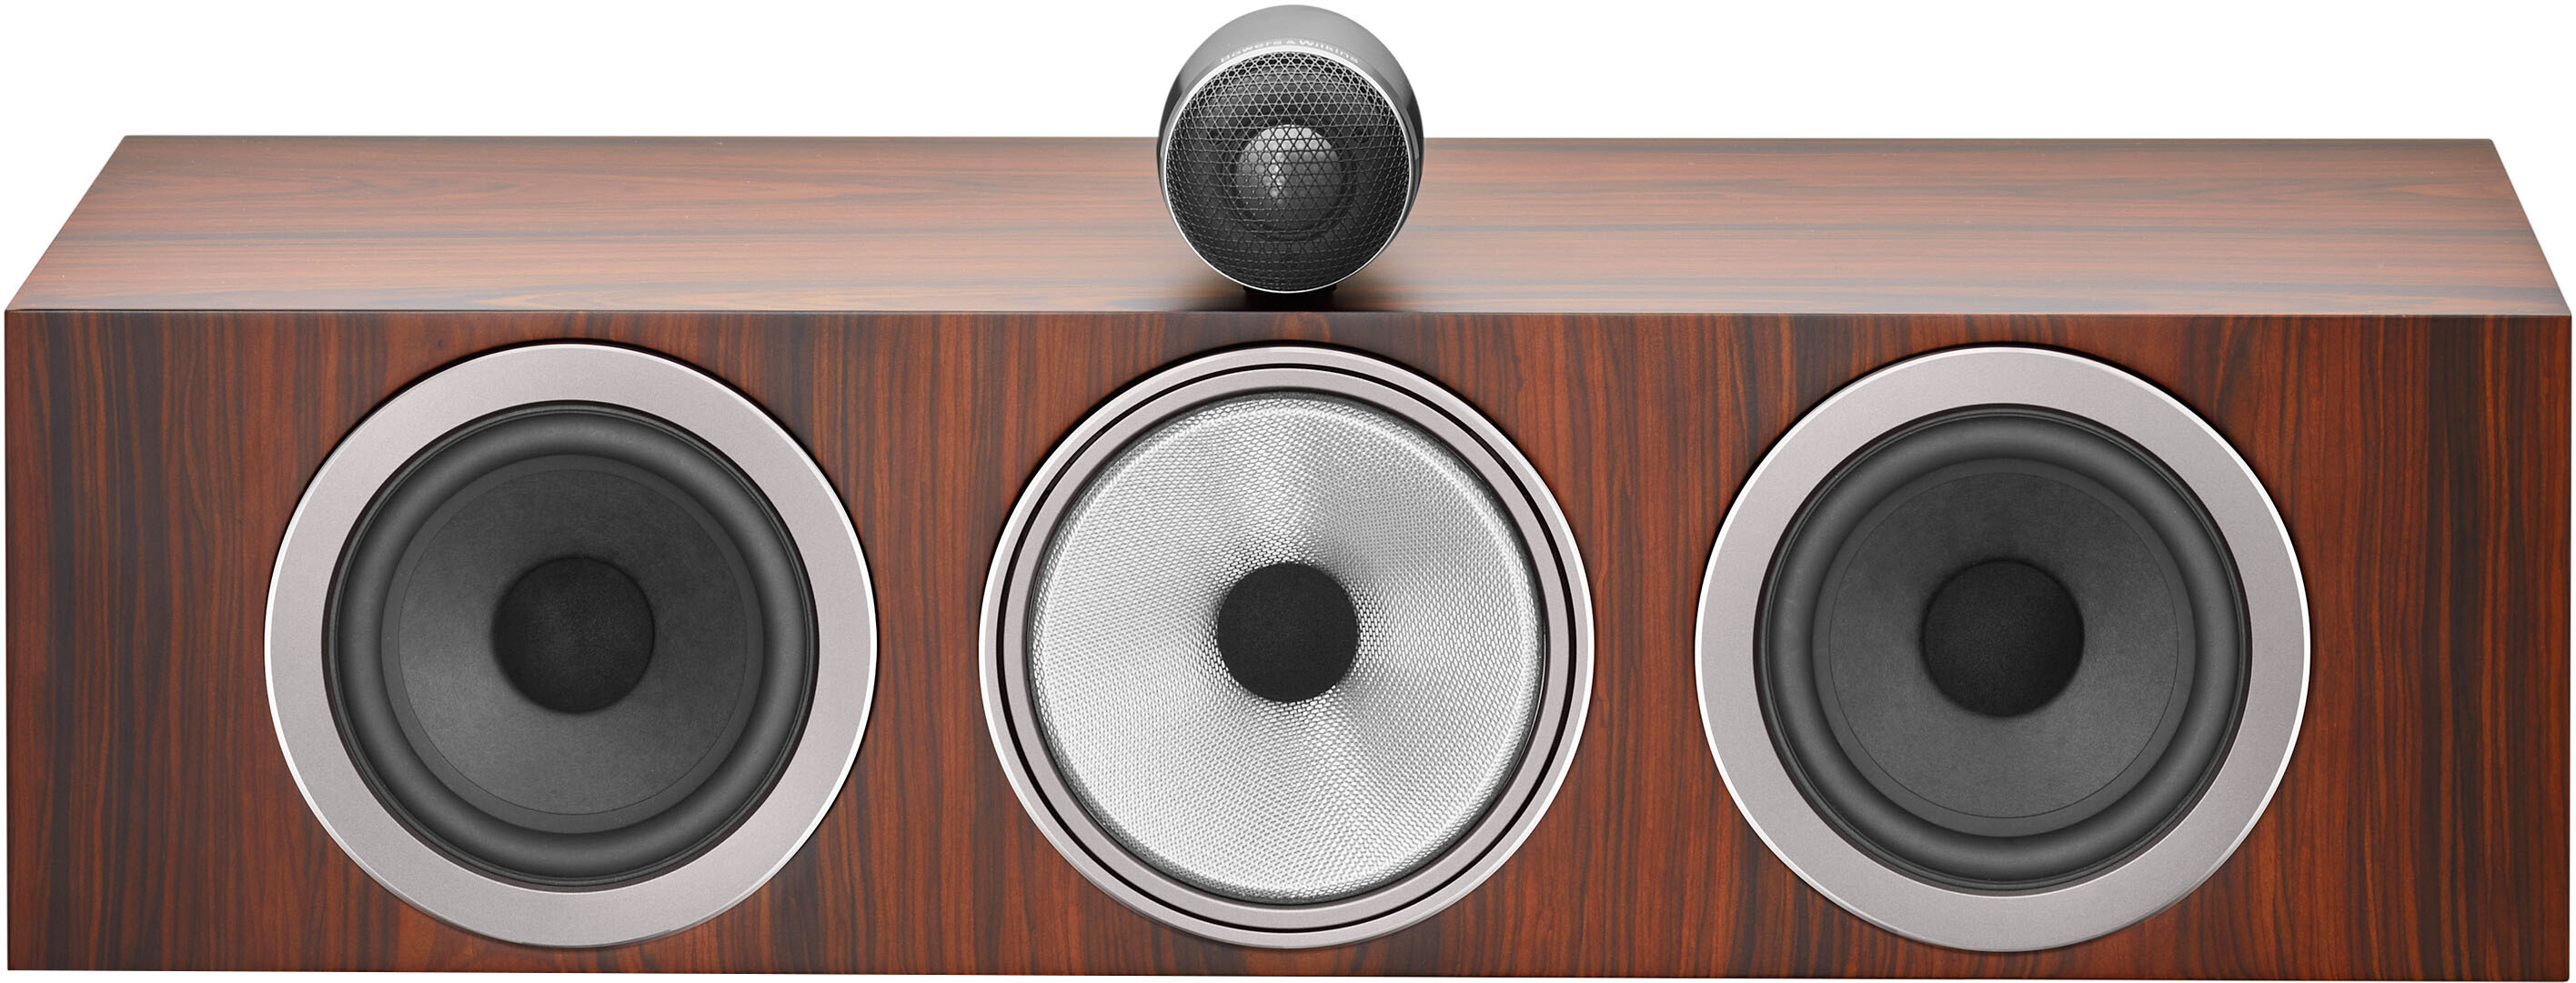 Left View: Bowers & Wilkins - 700 Series 3 Center Channel with 1" Tweeter On Top and Two 6.5" Bass Drivers (Each) - Mocha